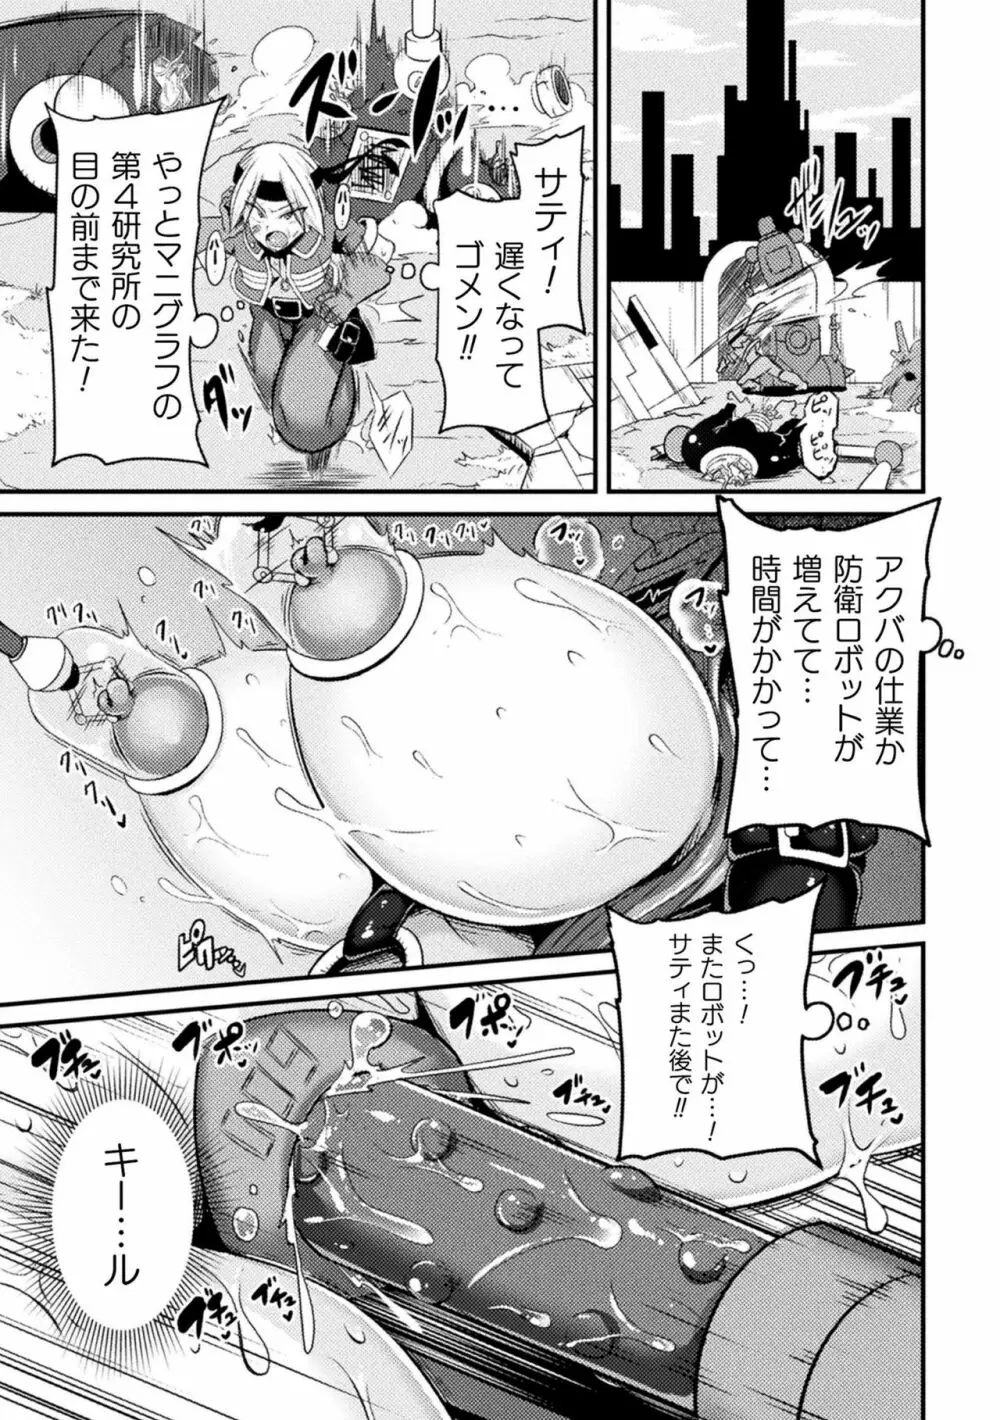 LOVE METER〜寝取られた相棒〜 #2 Page.1